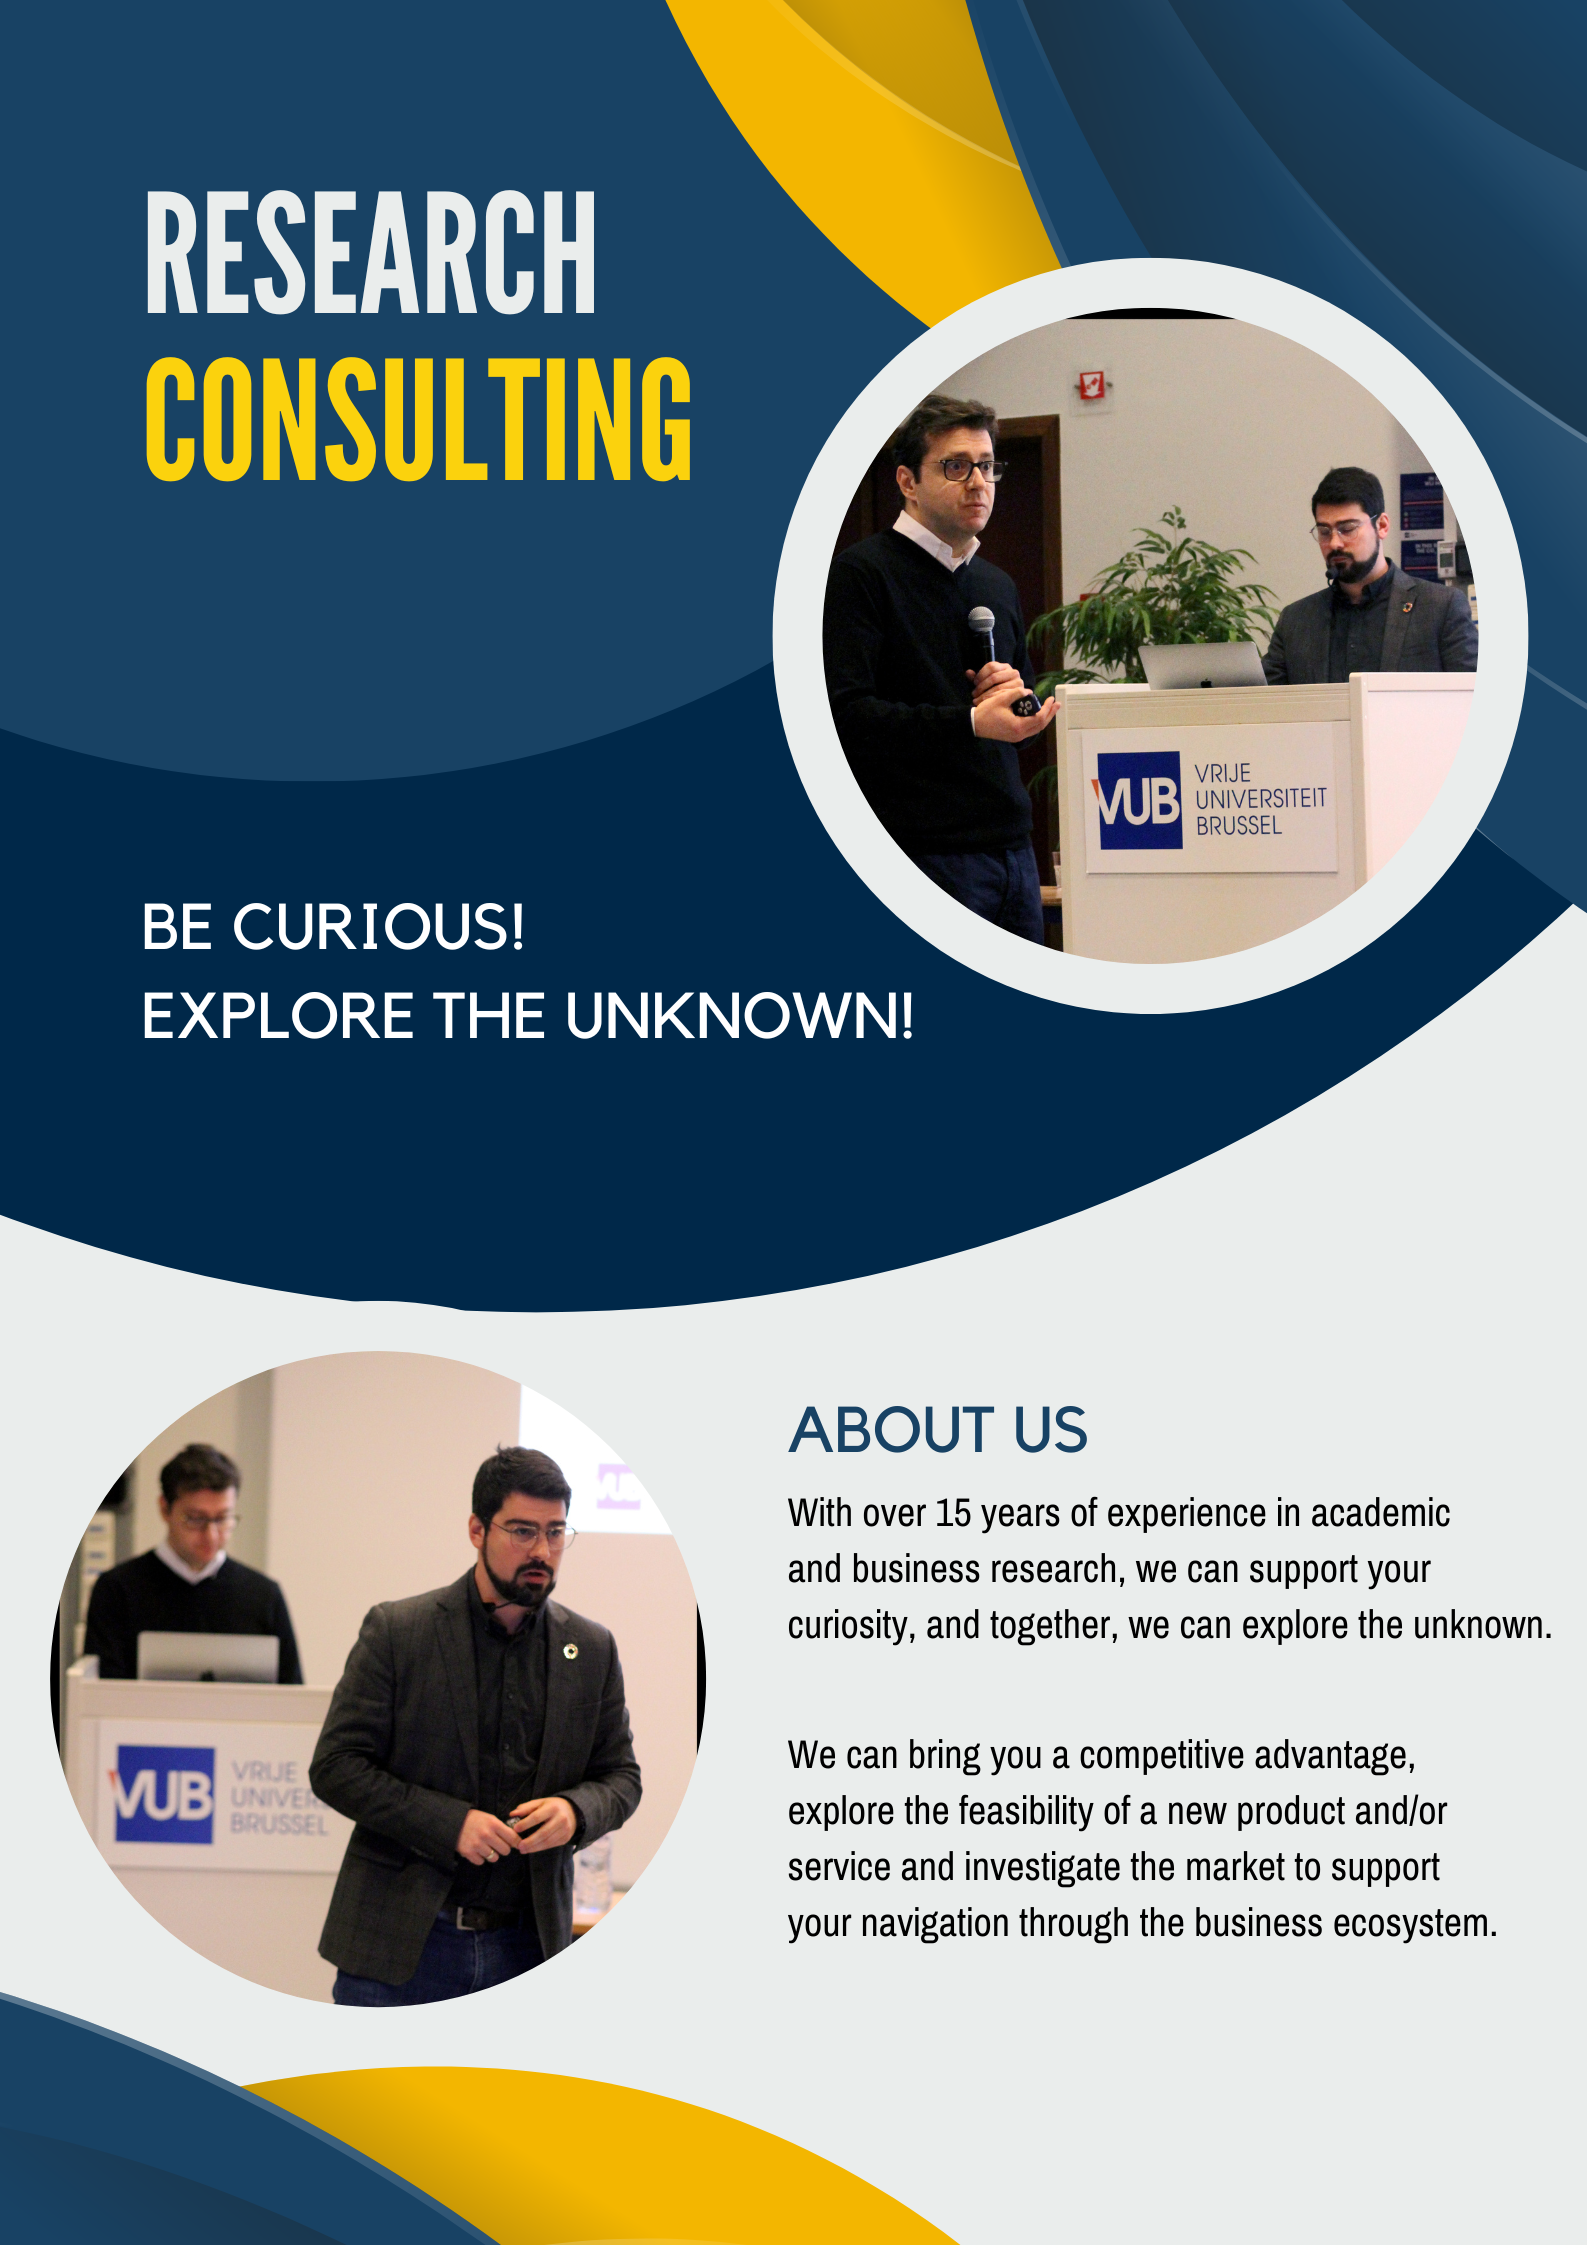 Research Consulting